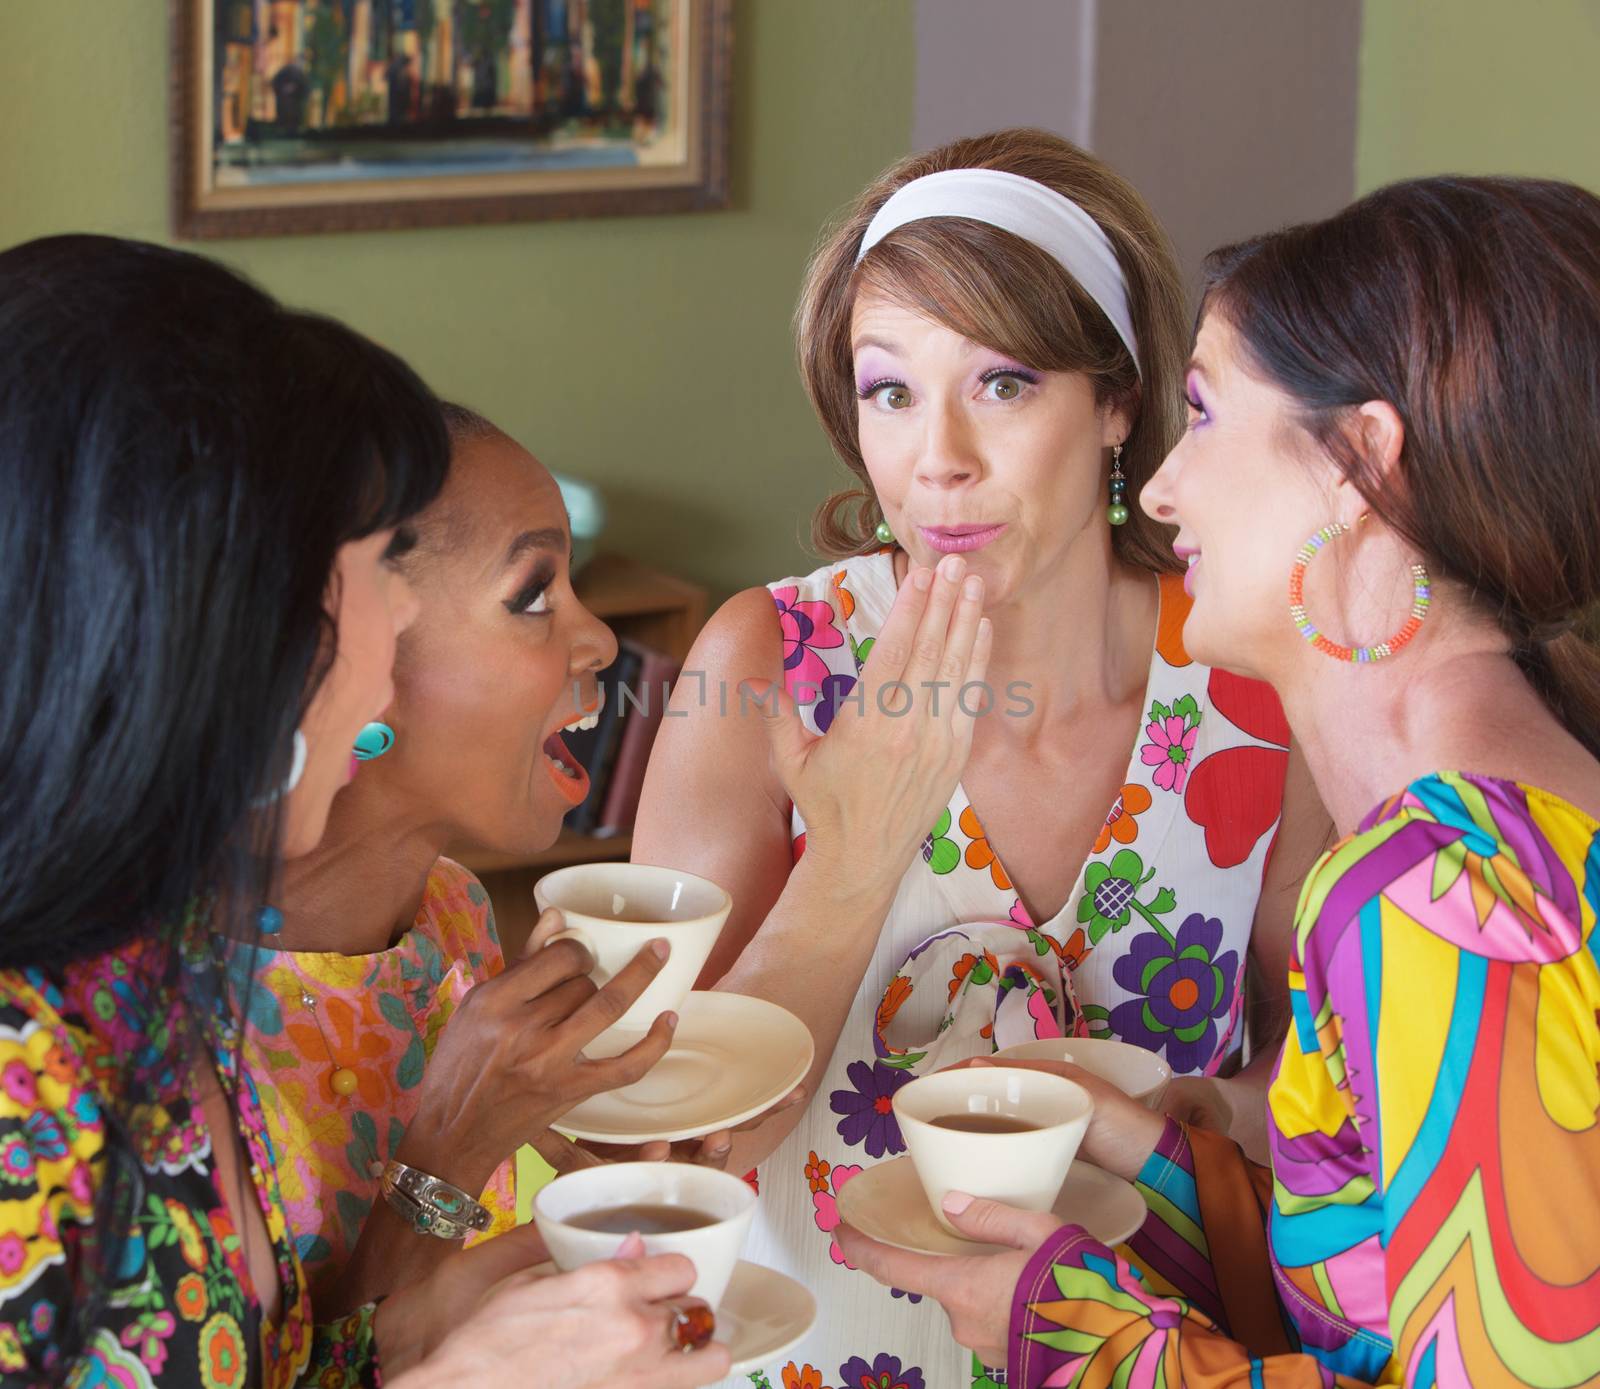 Embarrassed Woman with Friends Drinking Tea by Creatista